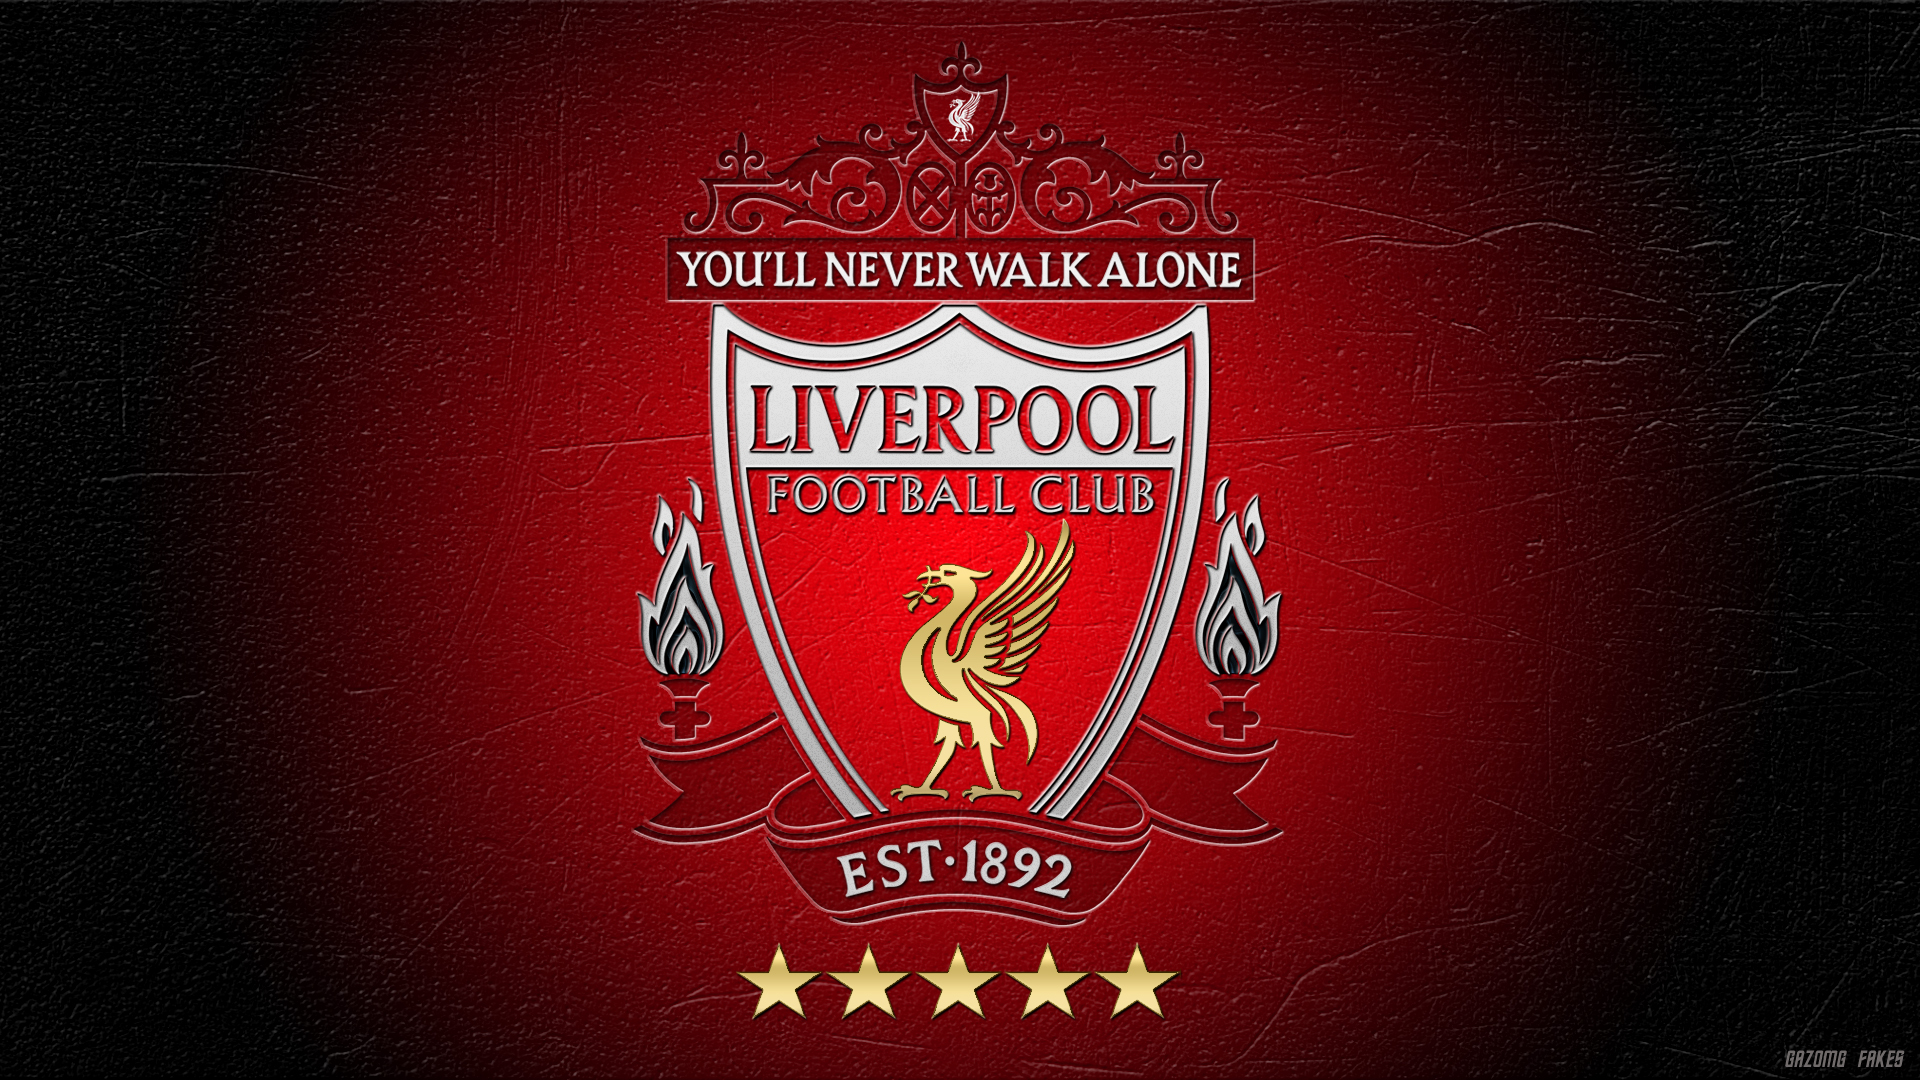 Liverpool FC official